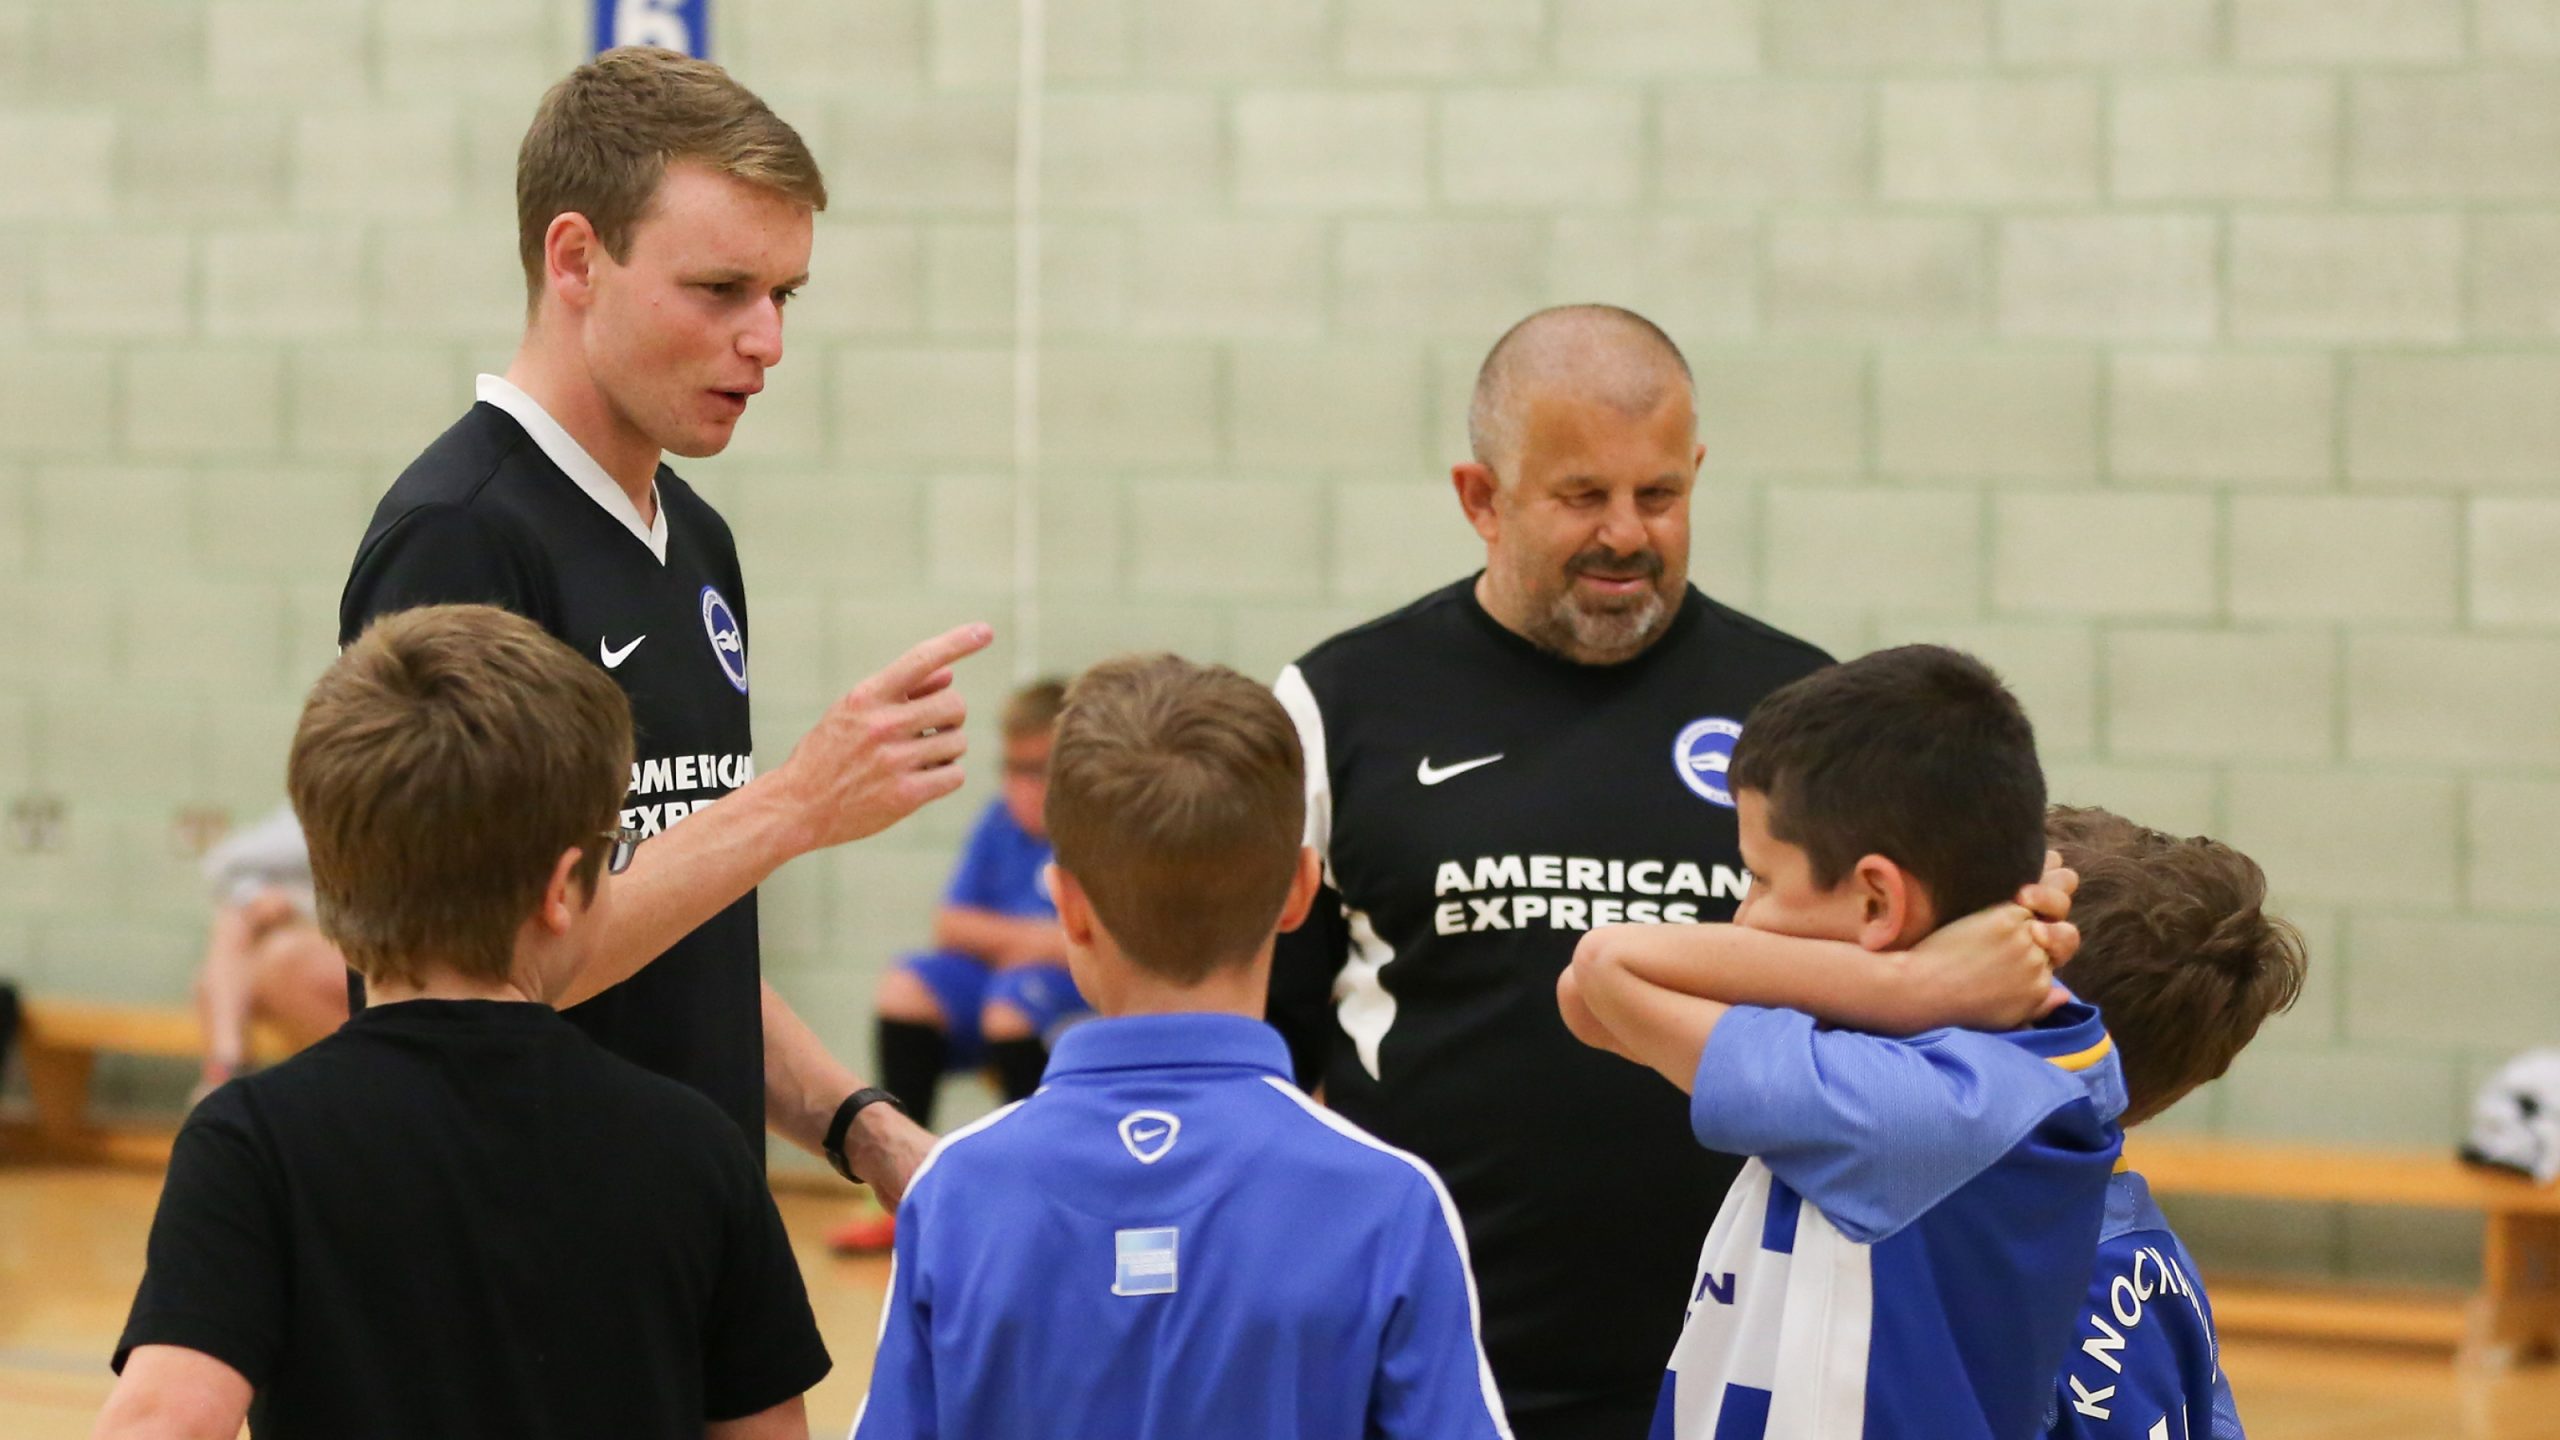 Kieran and Mark coaches with young kids